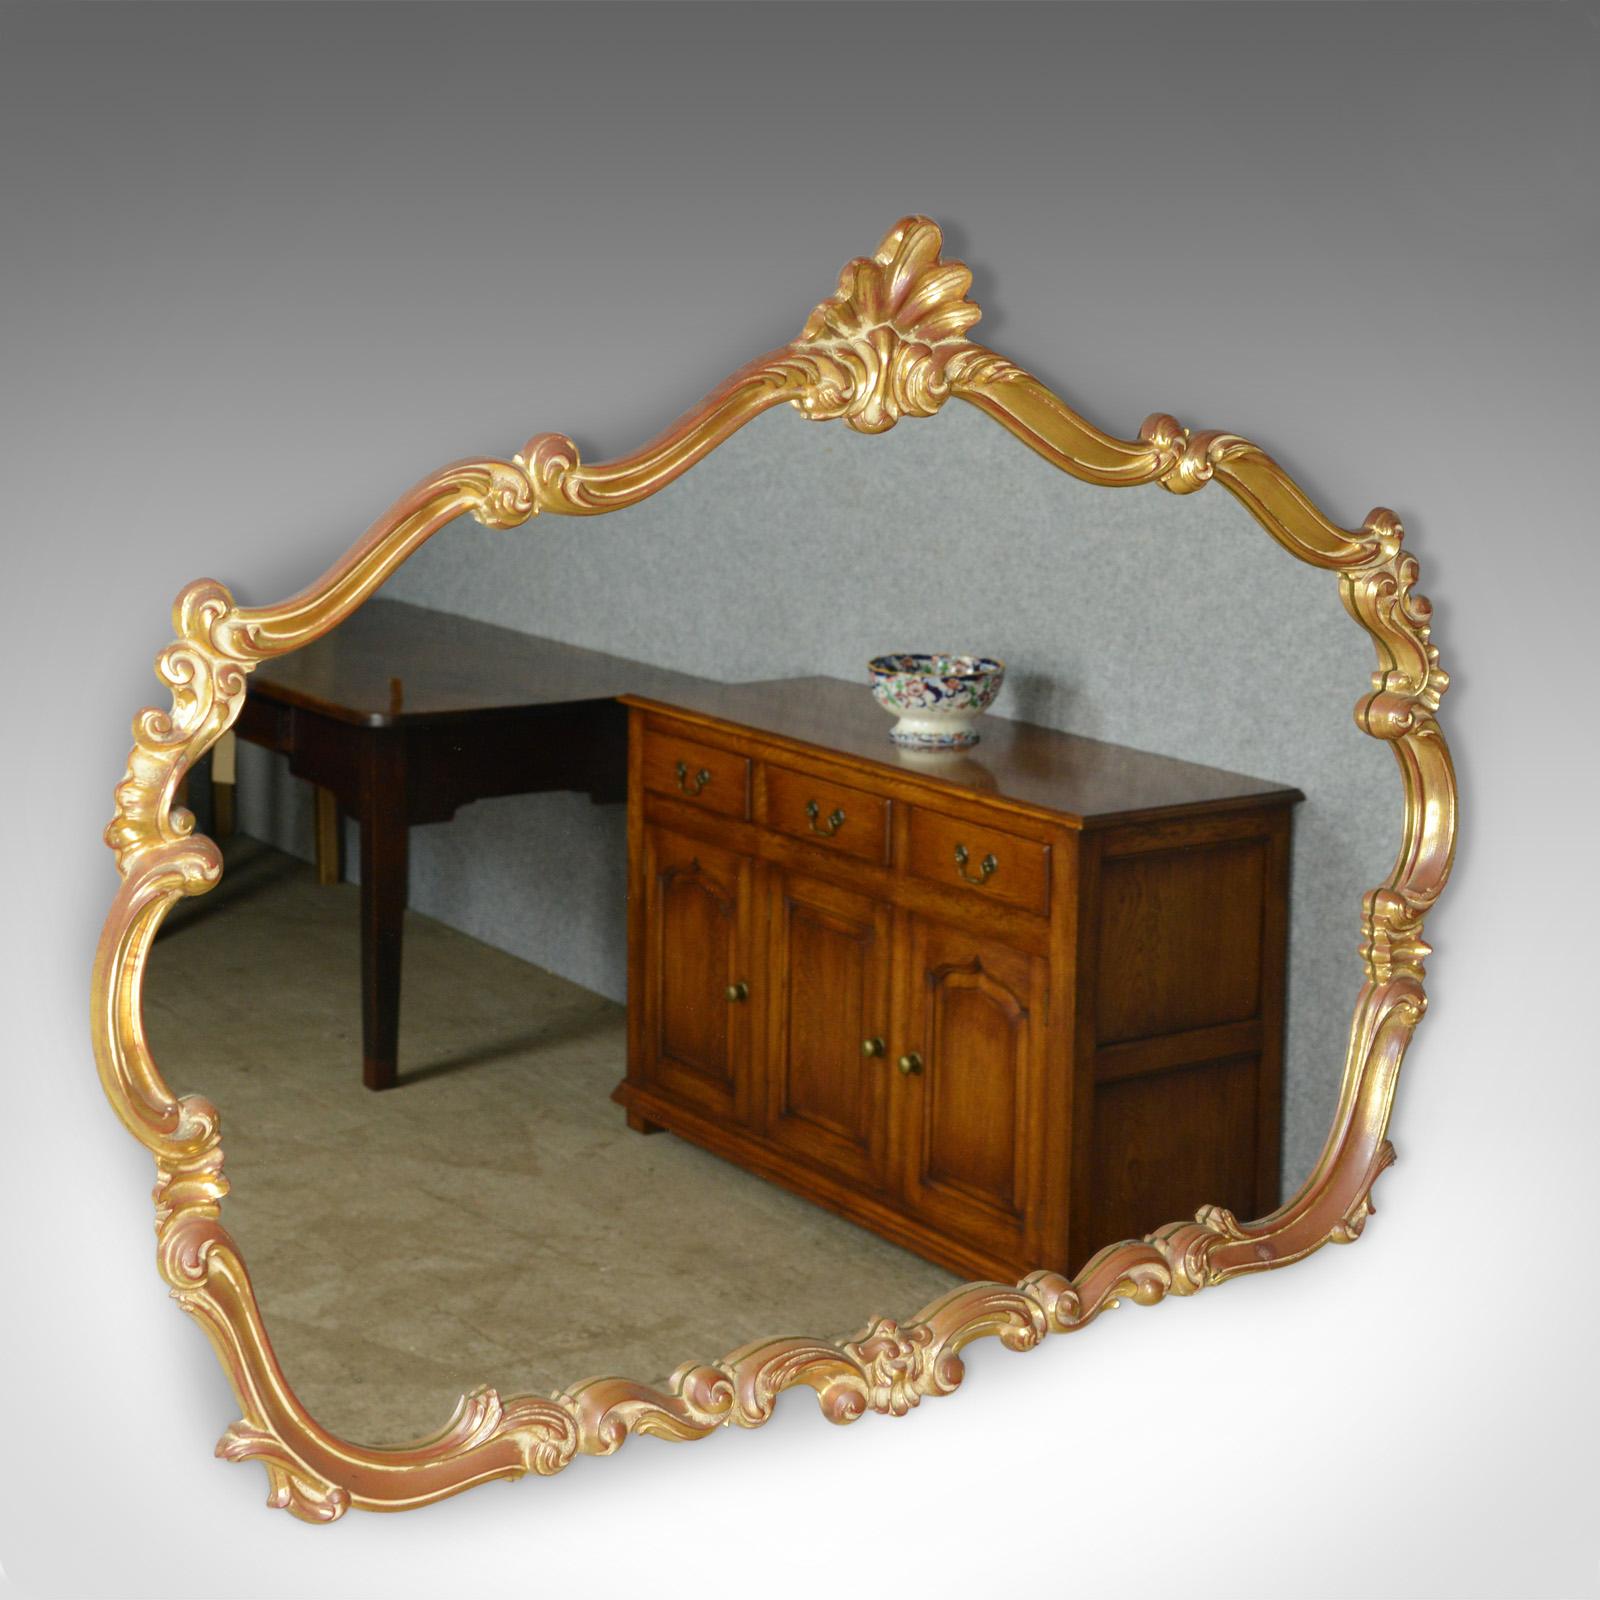 This is a large, vintage wall mirror in the Victorian Rococo revival taste, English dating to the latter part of the 20th century.

Typically elaborate and elegant design
Gilt frame featuring scrolls, leaves and embellishment
Quality shaped